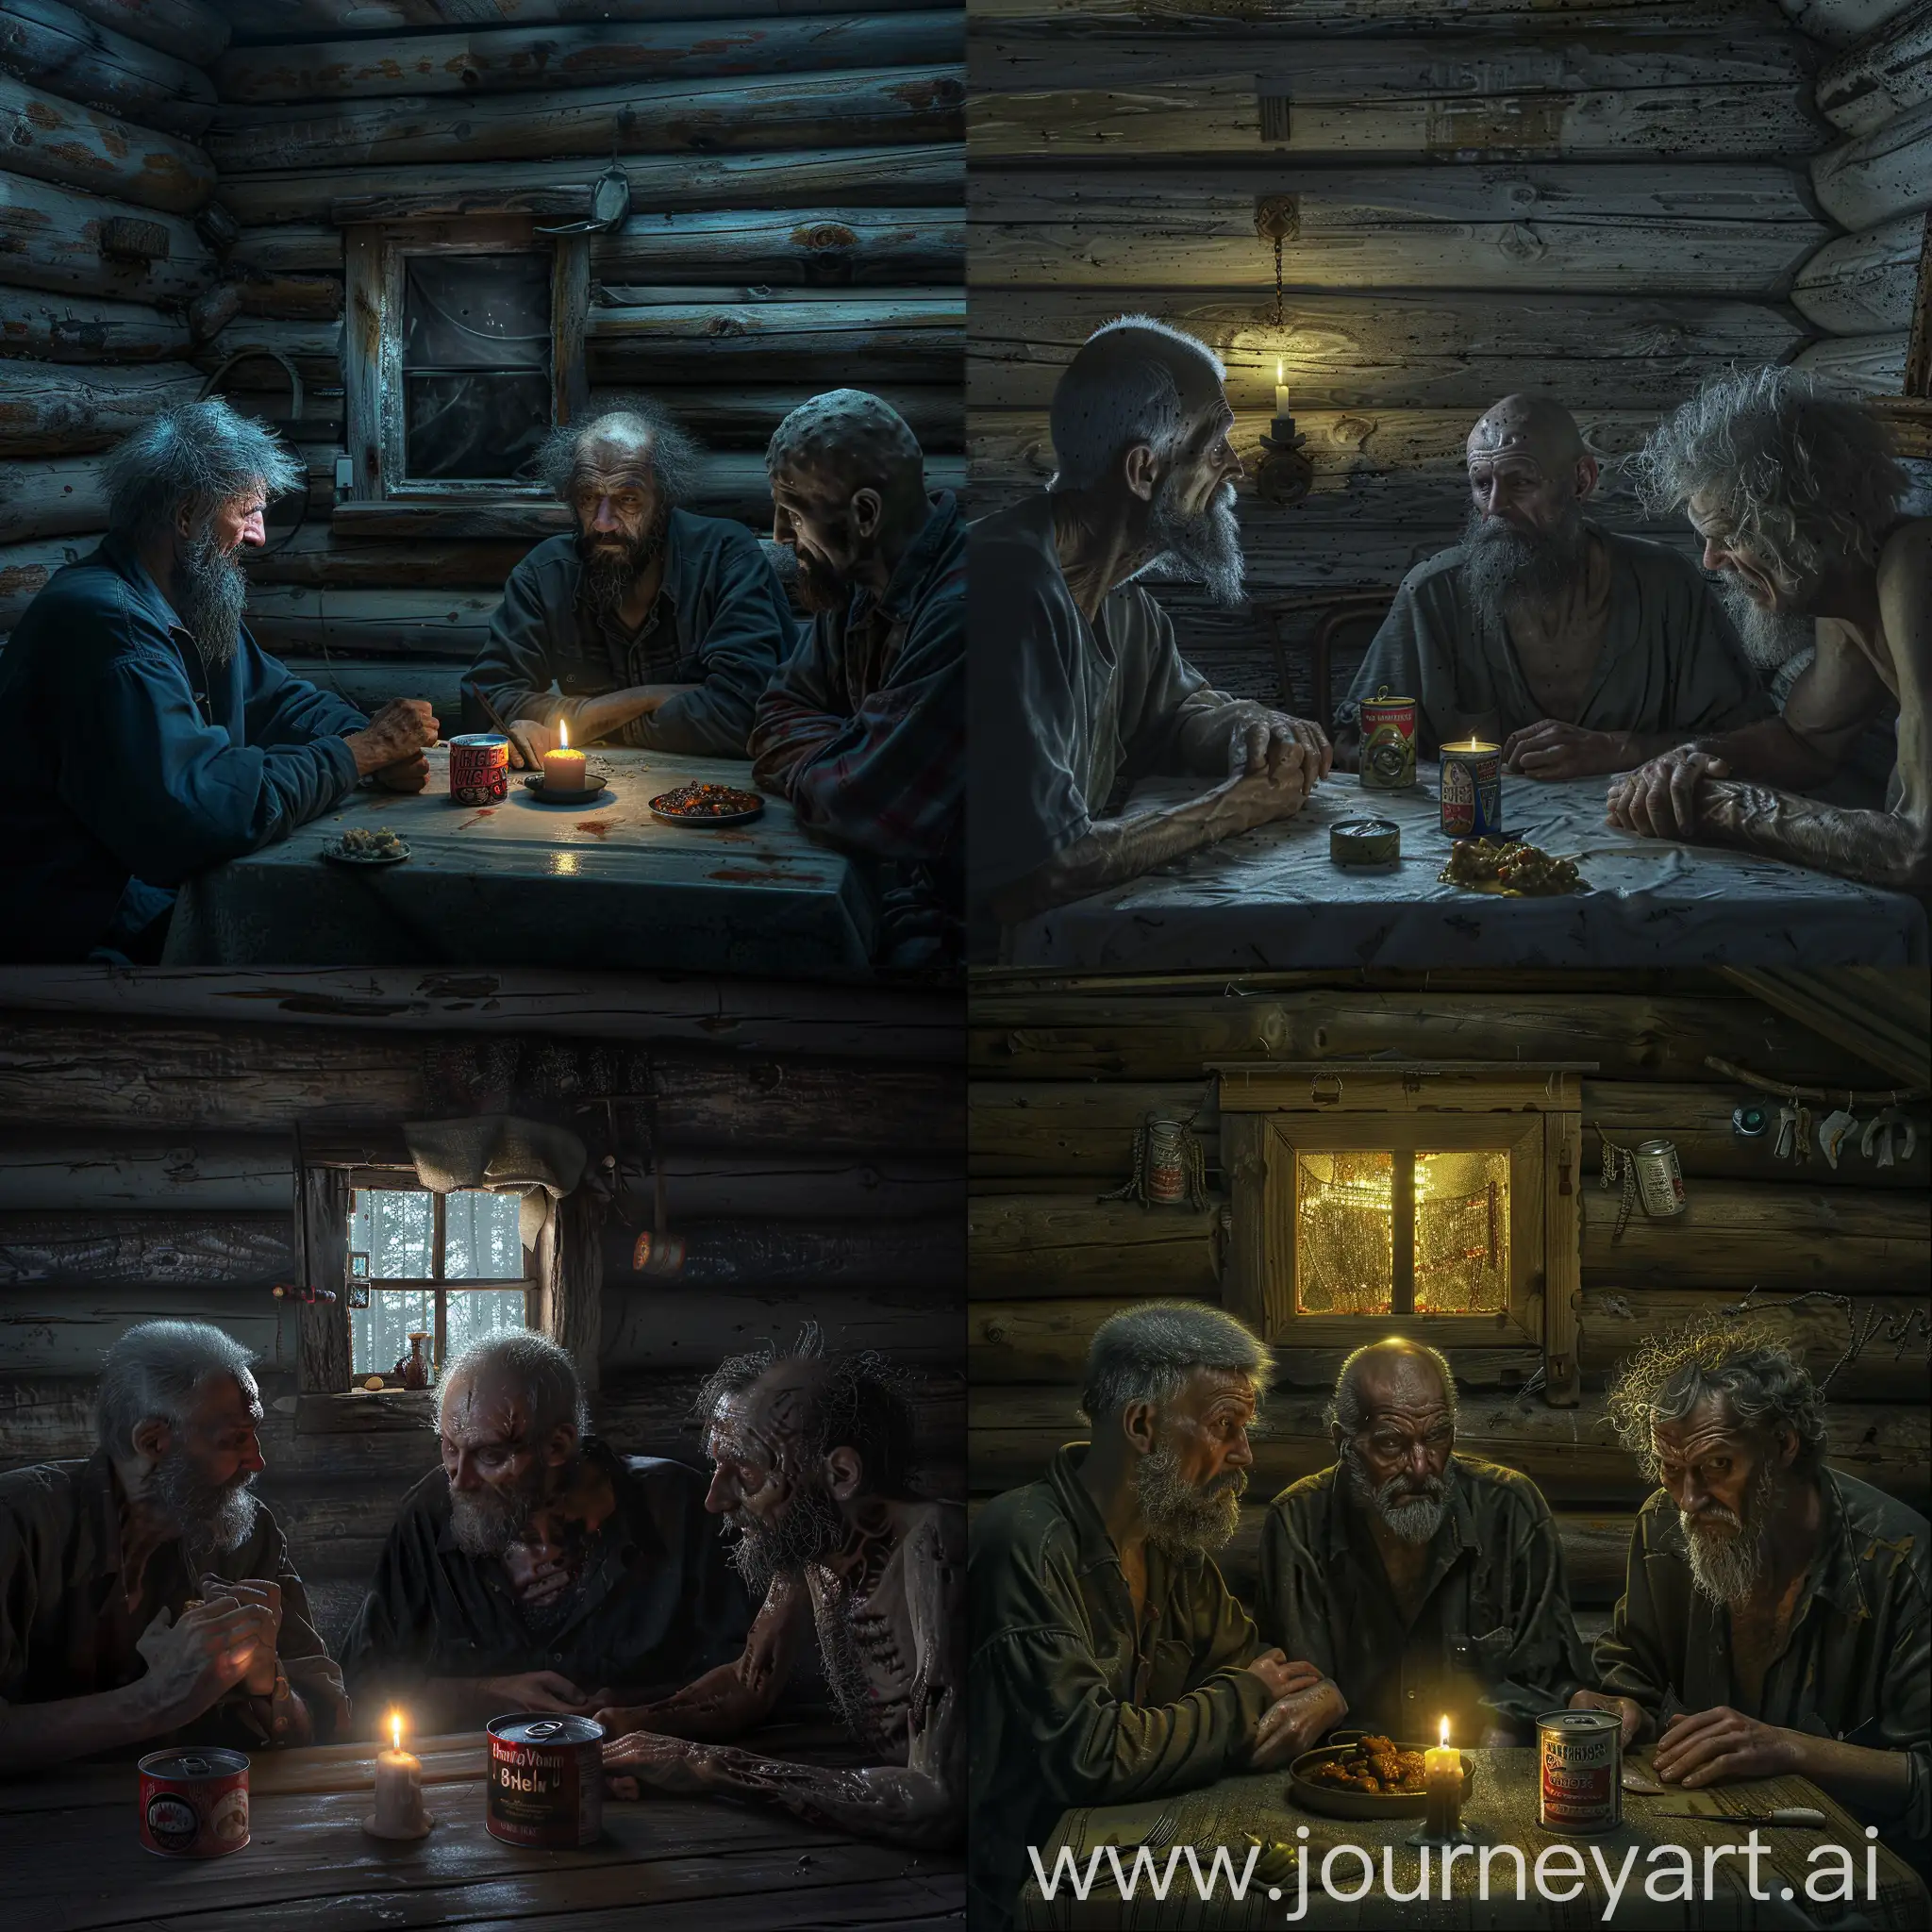 Gloomy-Night-Scene-with-Three-Men-at-a-Log-House-Table